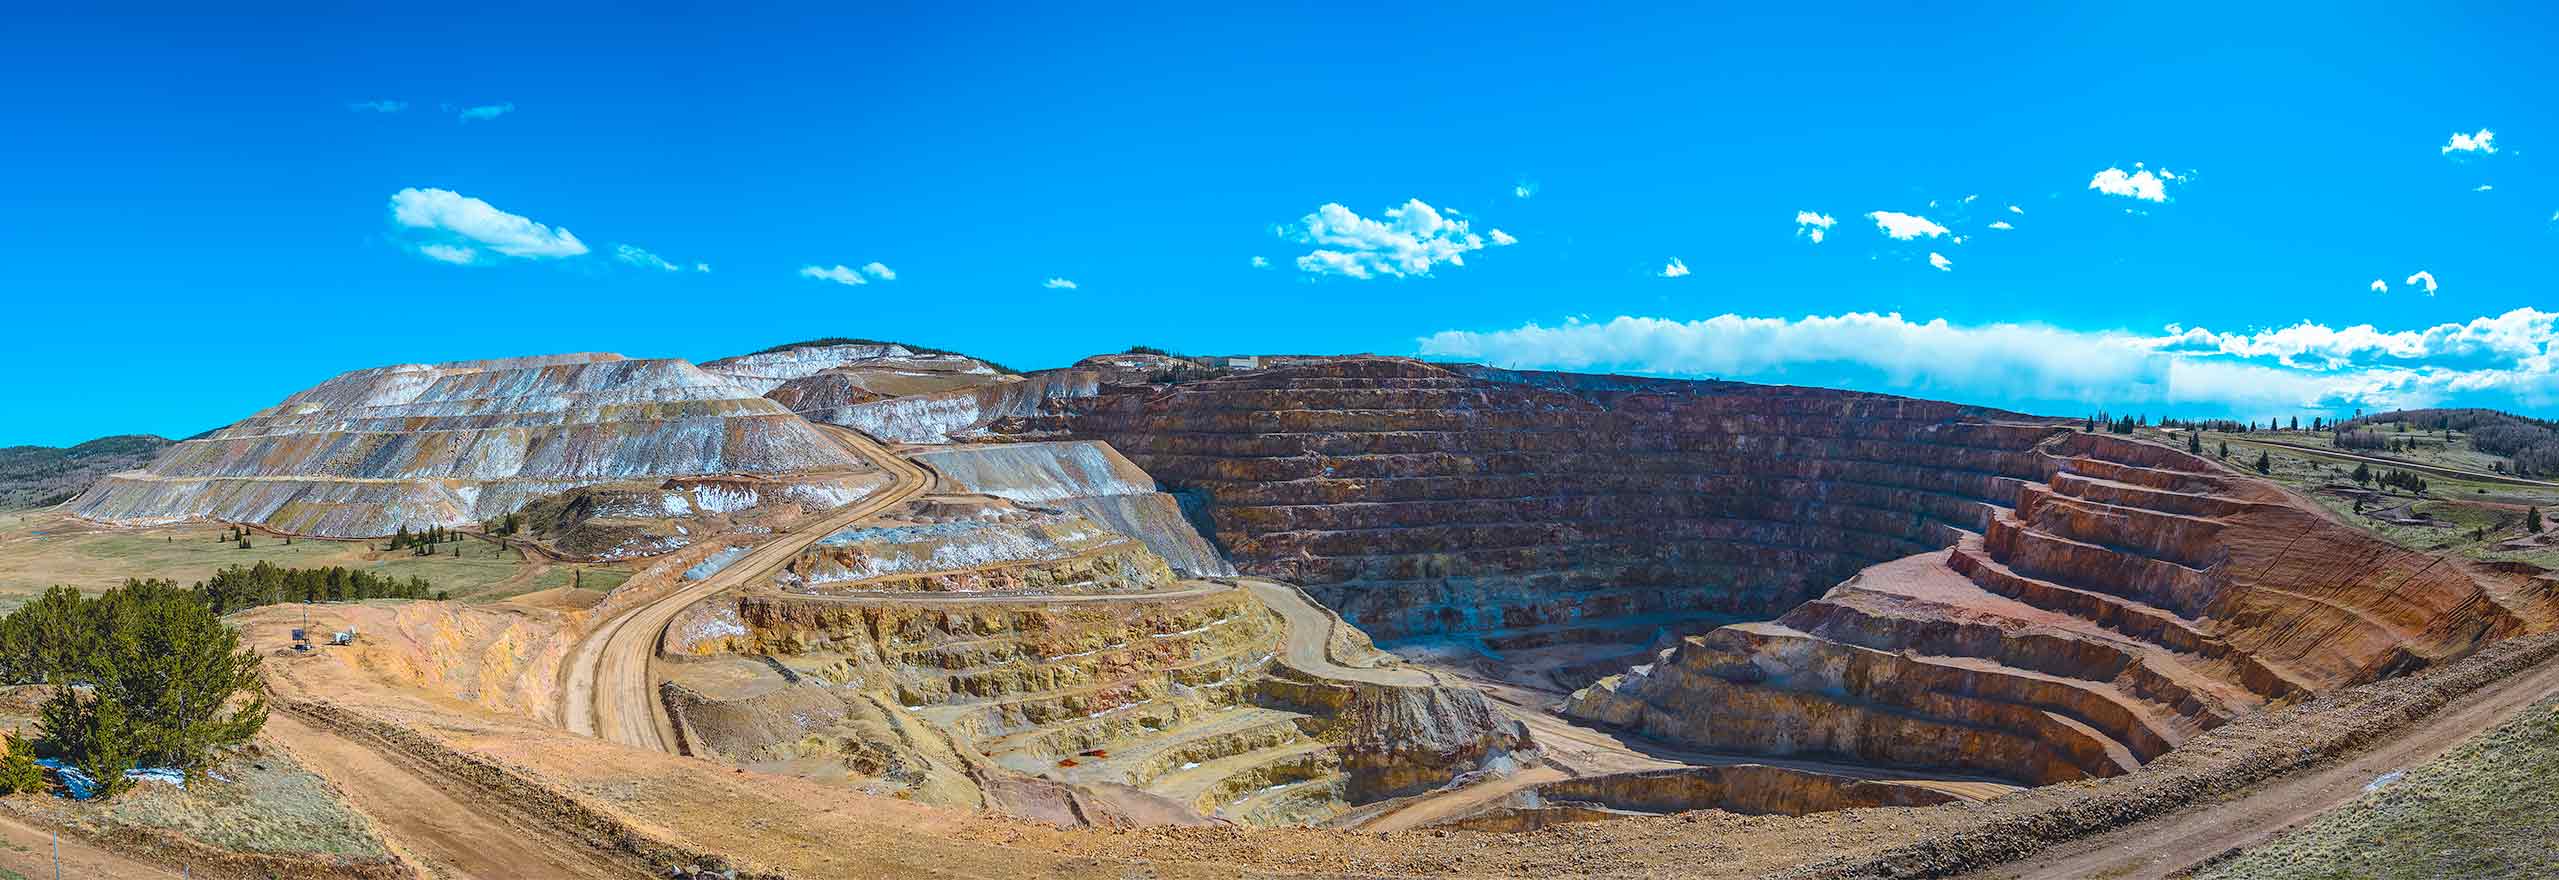 wide view of open pit operational mine